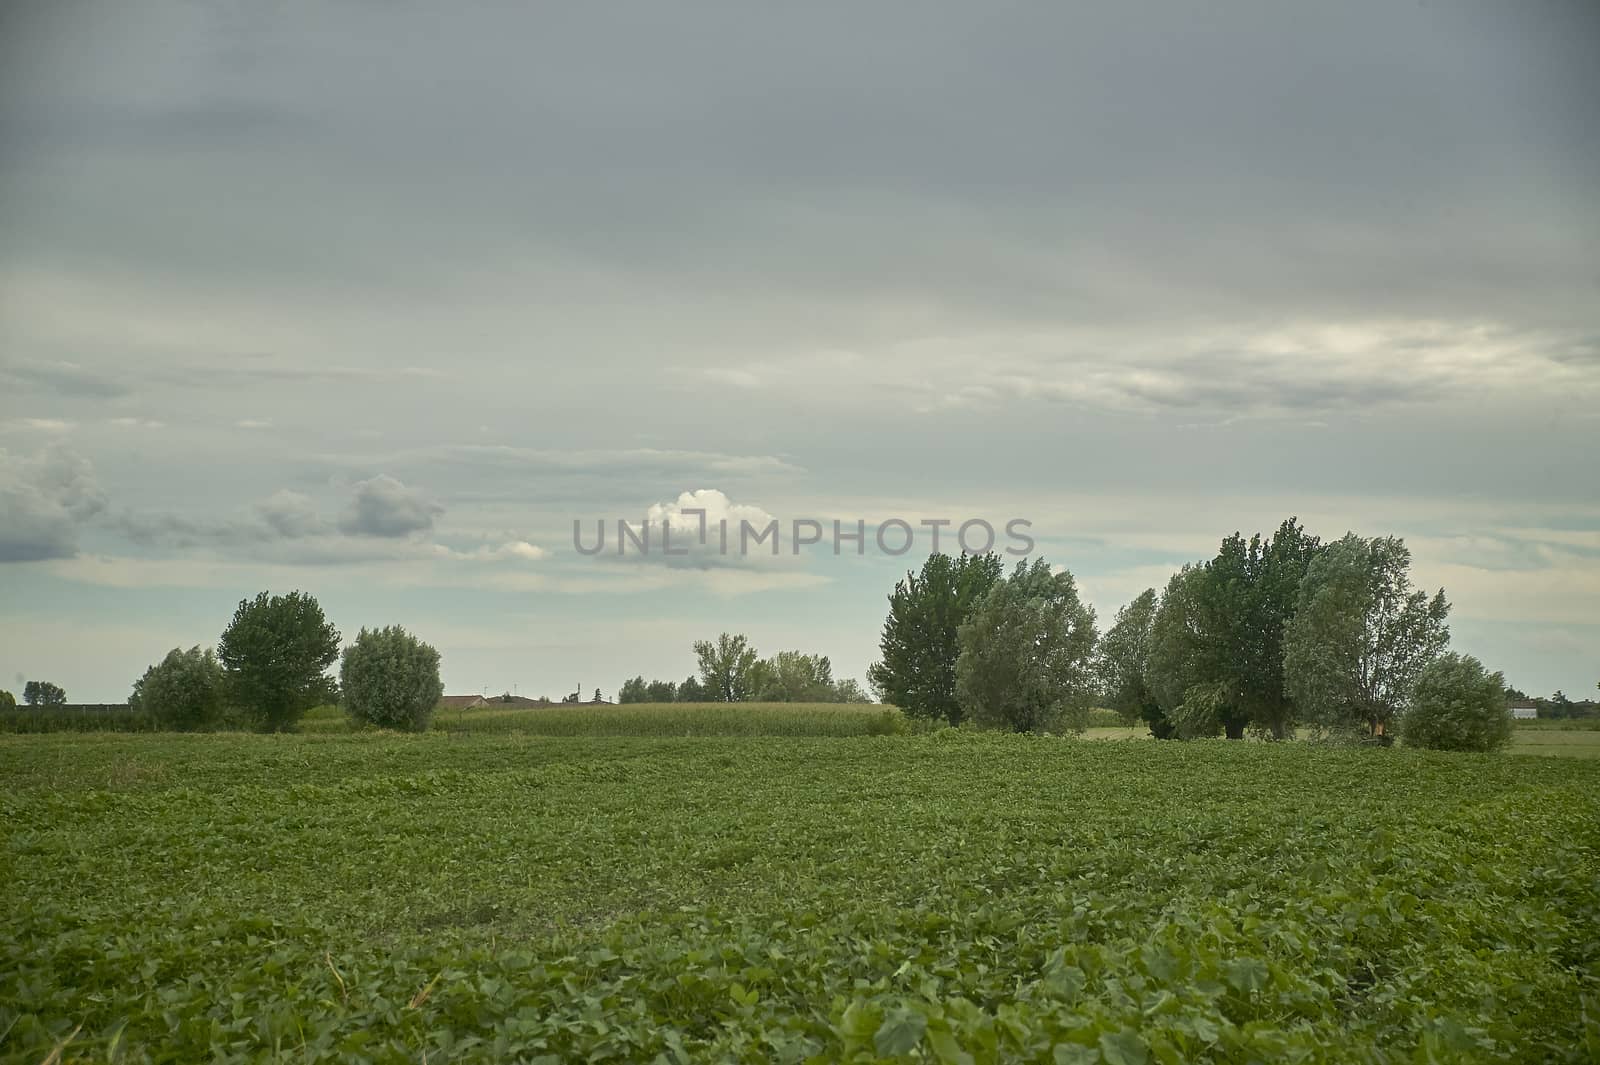 Typical rural landscape and agricultural cultivation of the Po Valley in northern Italy.